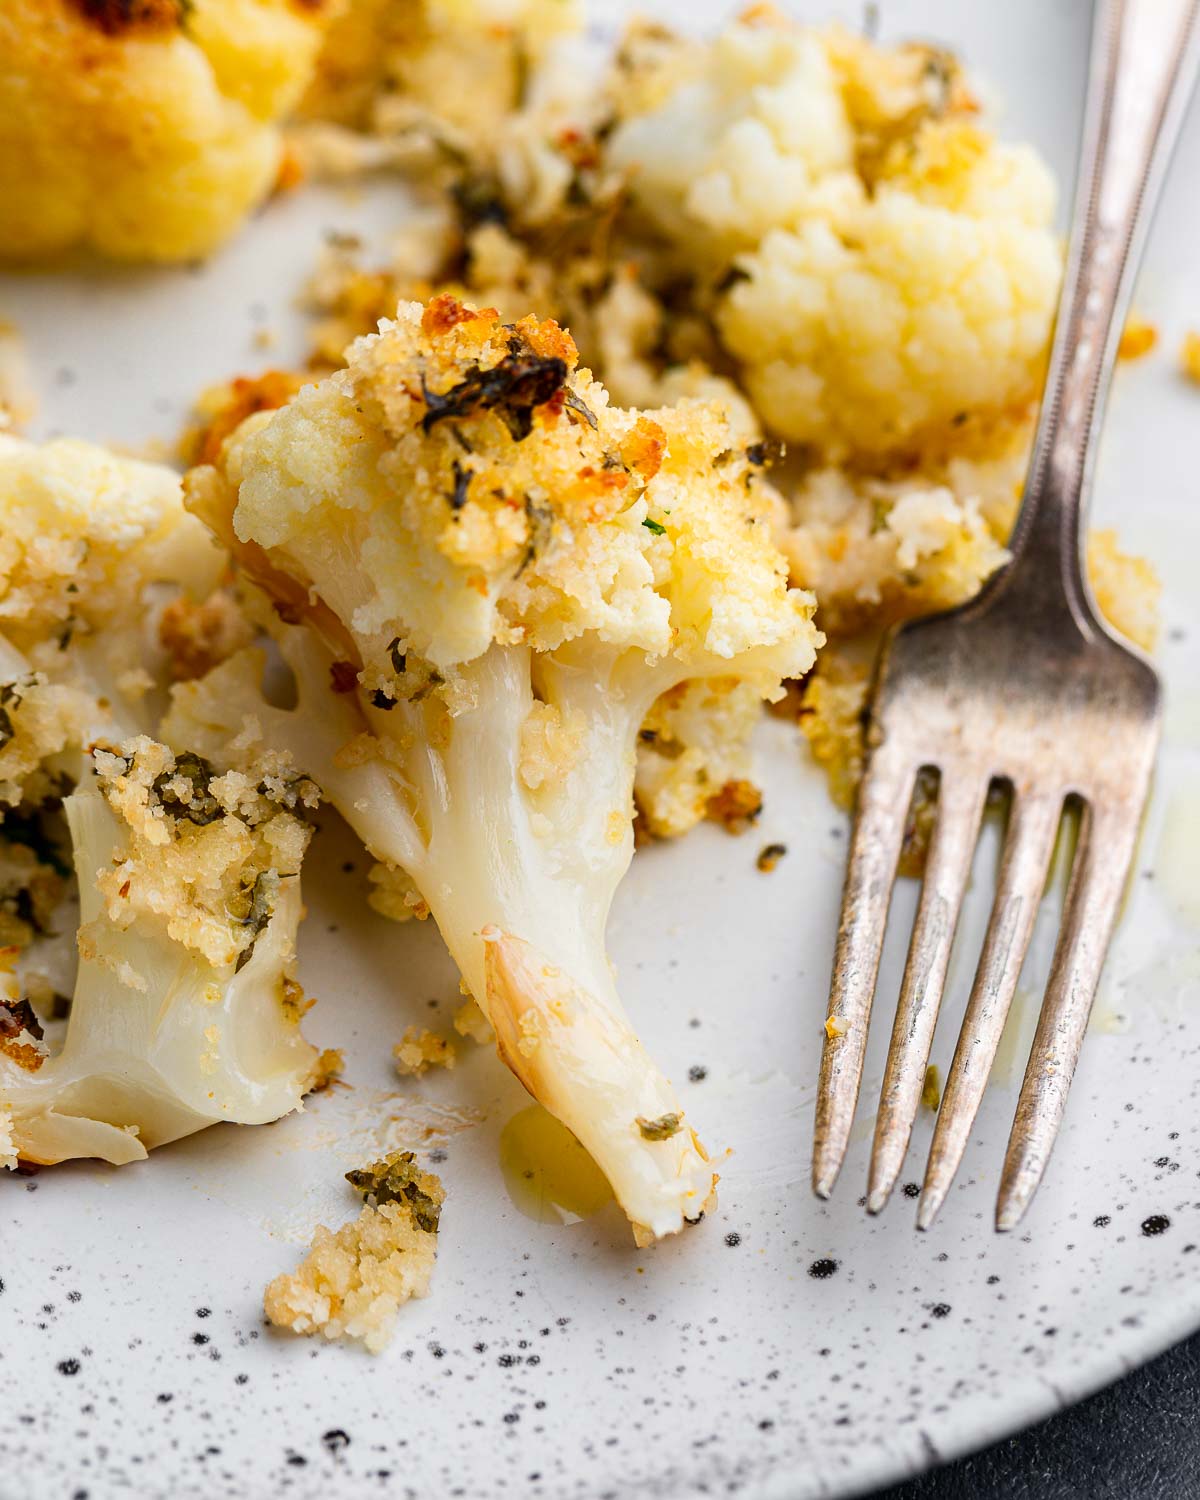 Roasted cauliflower with breadcrumbs and cheese in white plate.